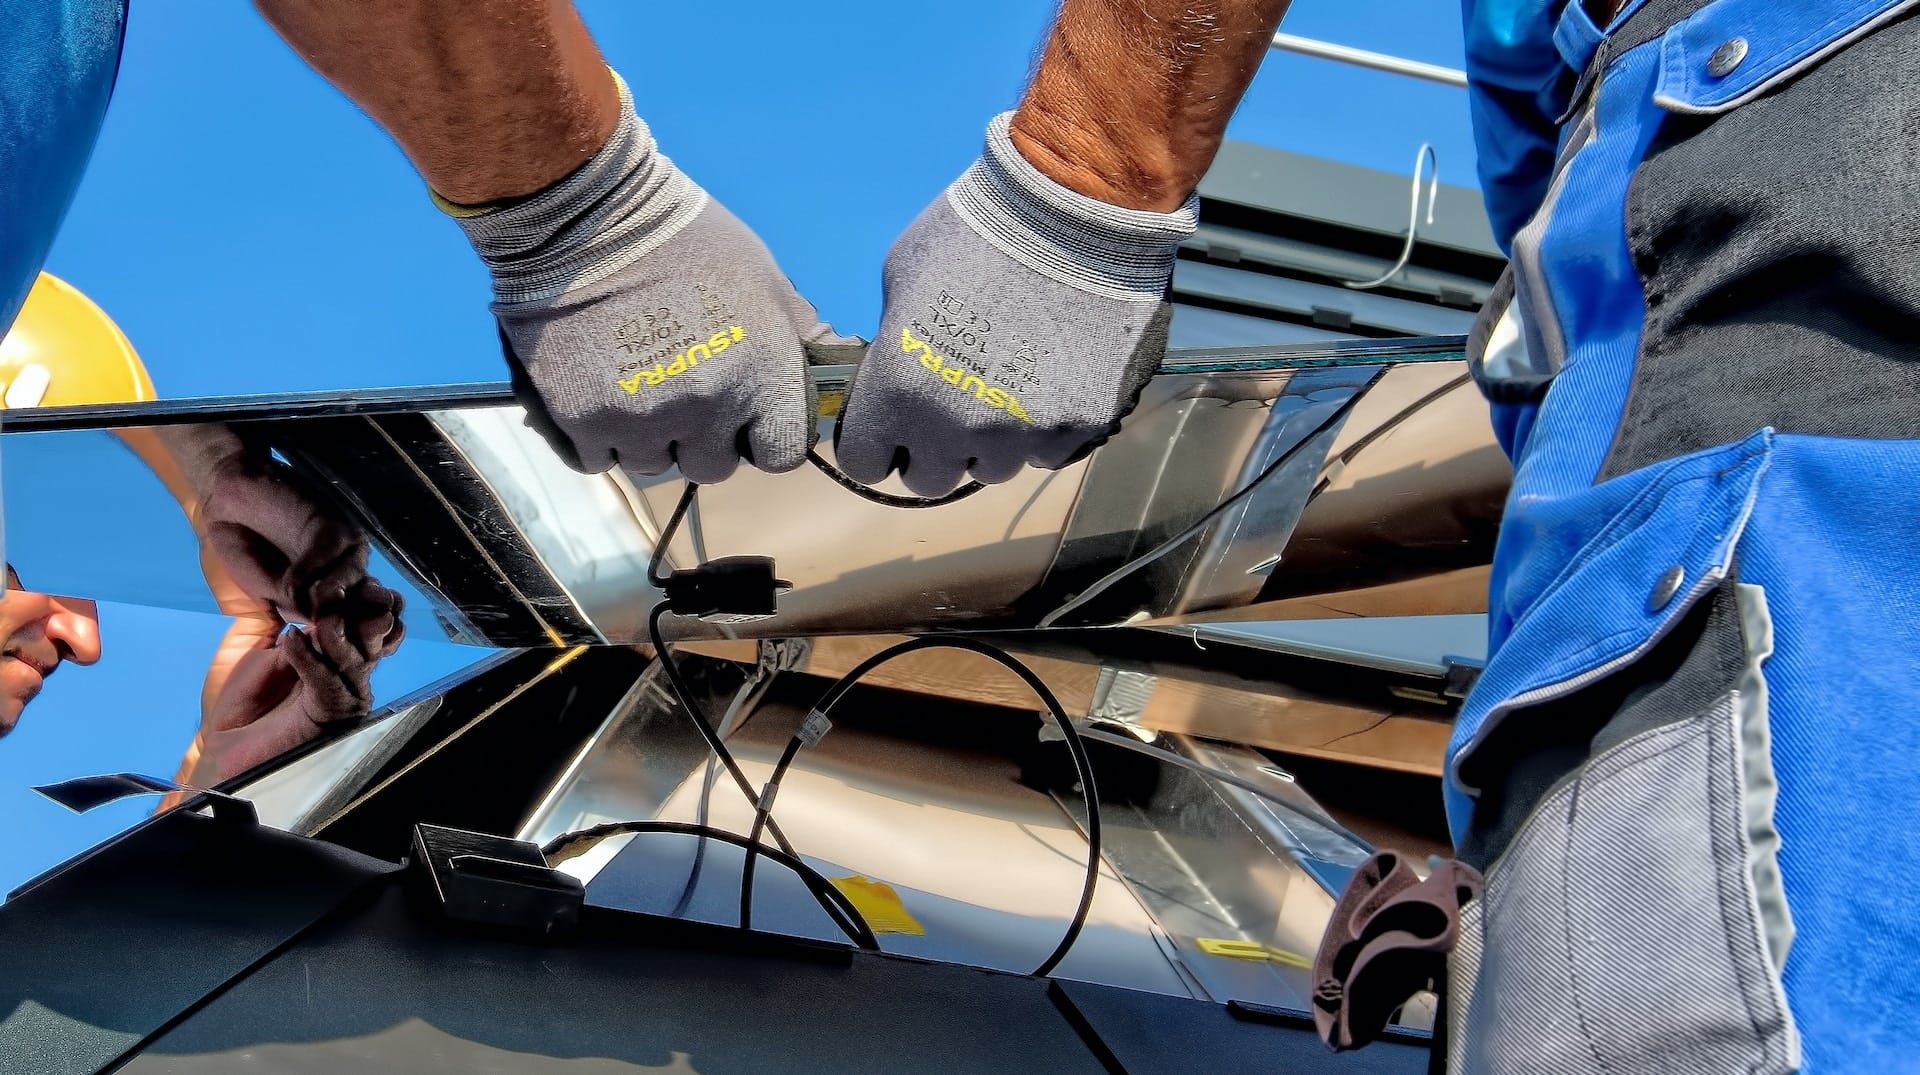 roof installers holding a piece of solar roof and installing it